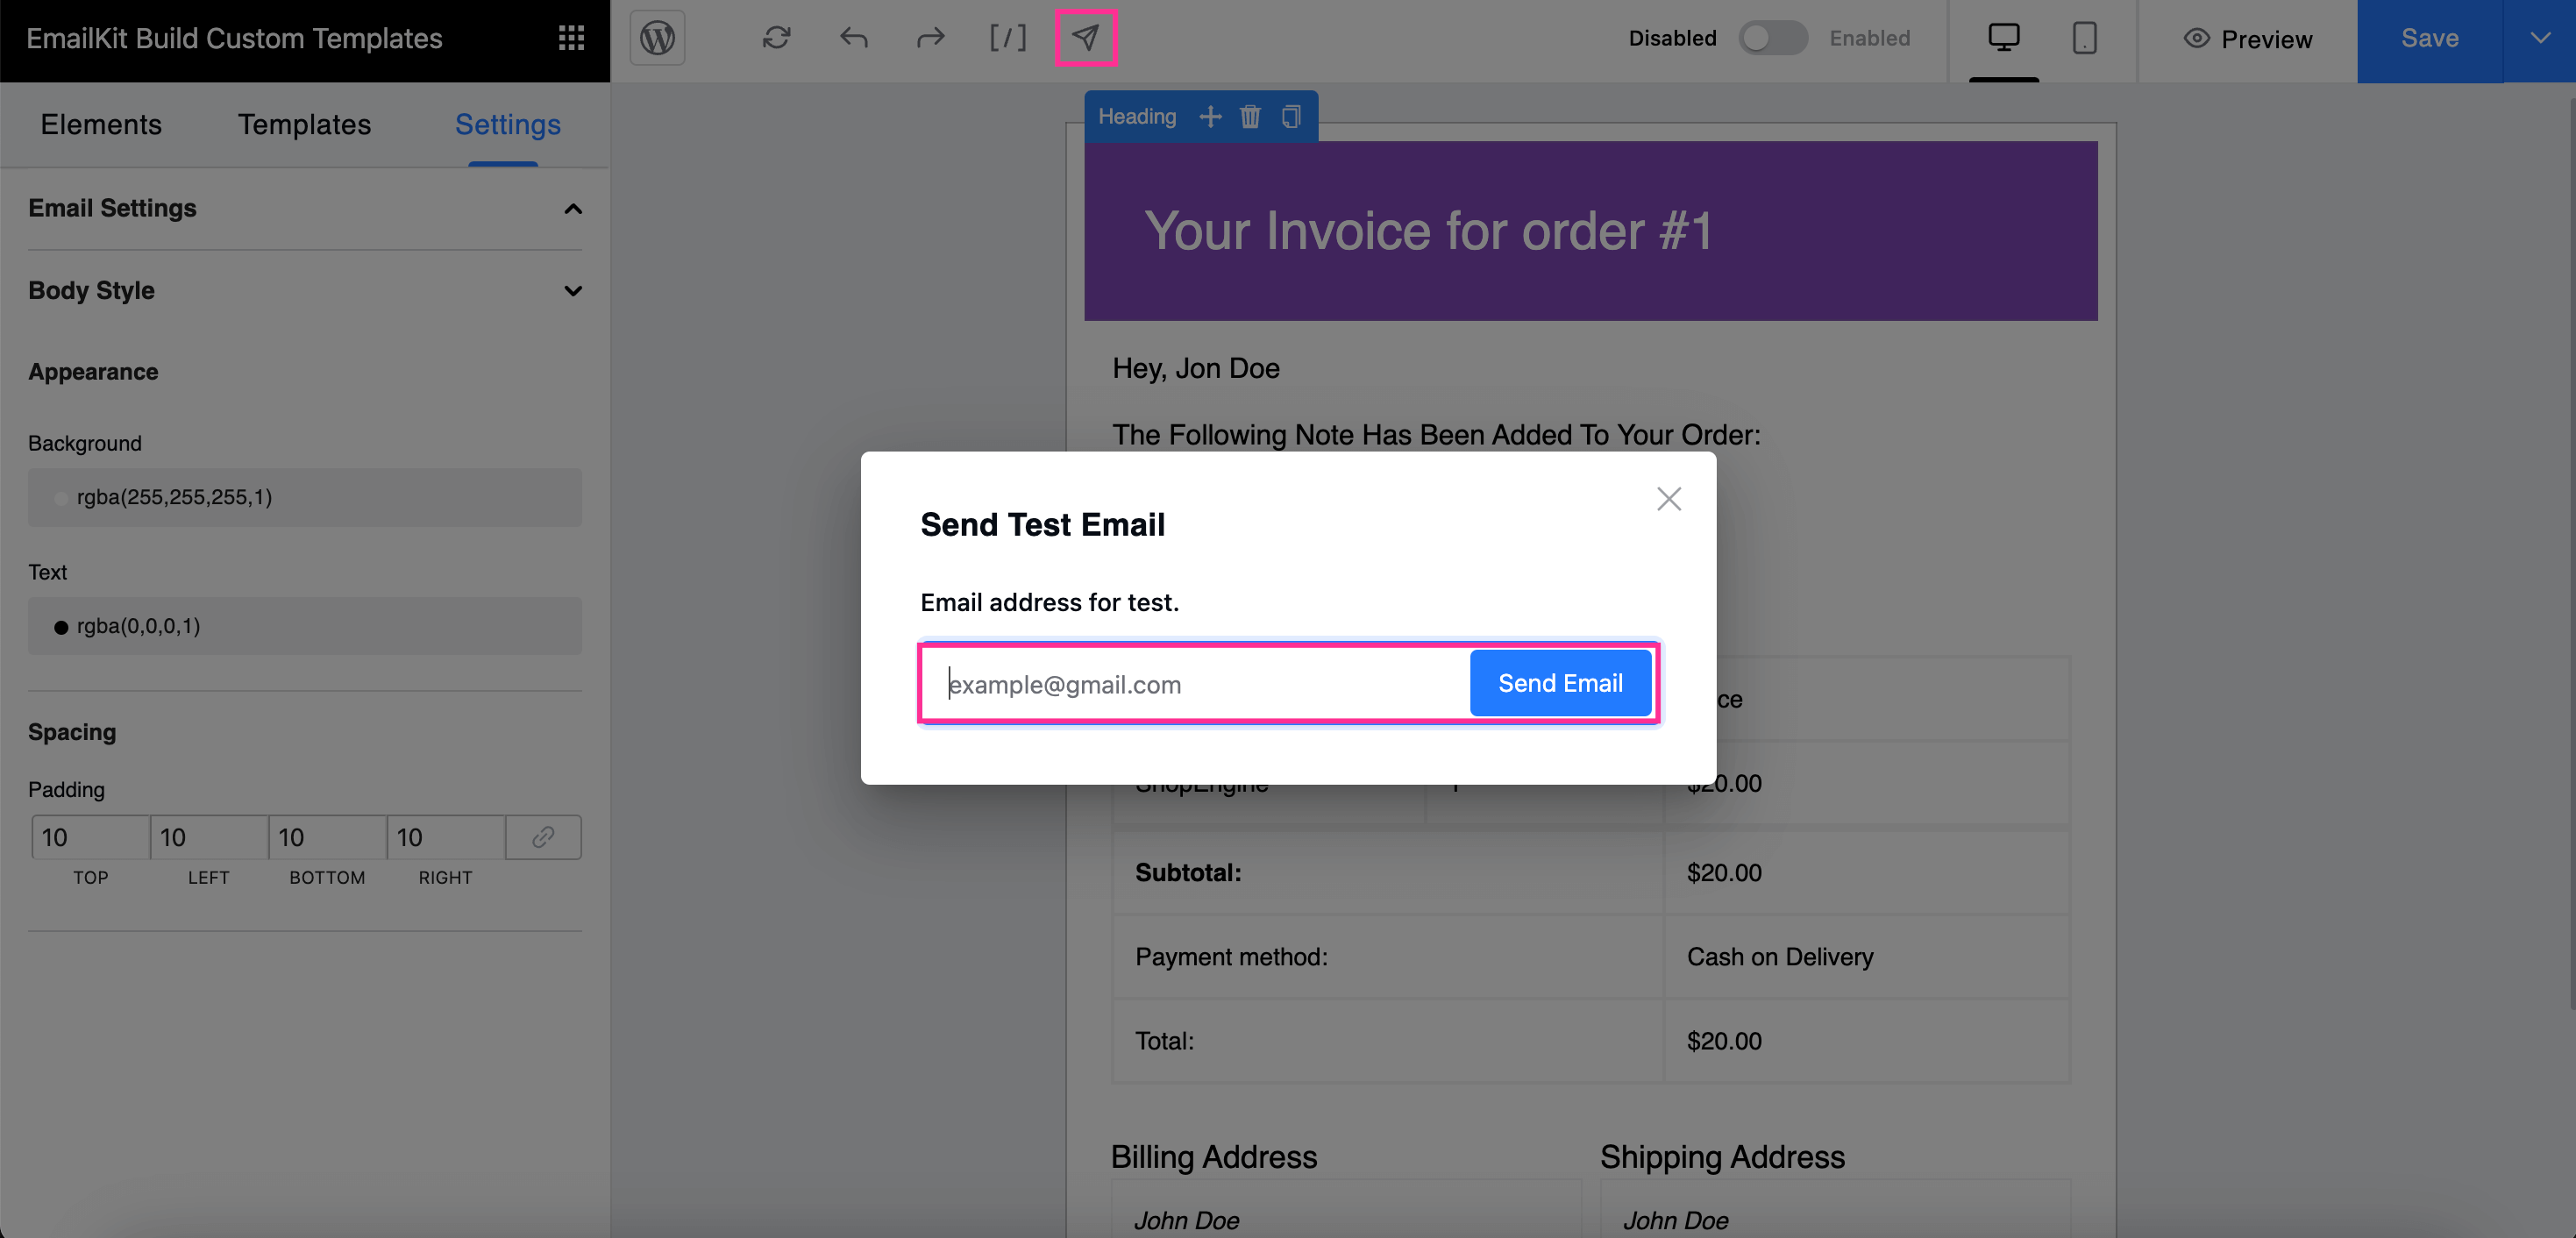 Test WooCommerce emails using EmailKit